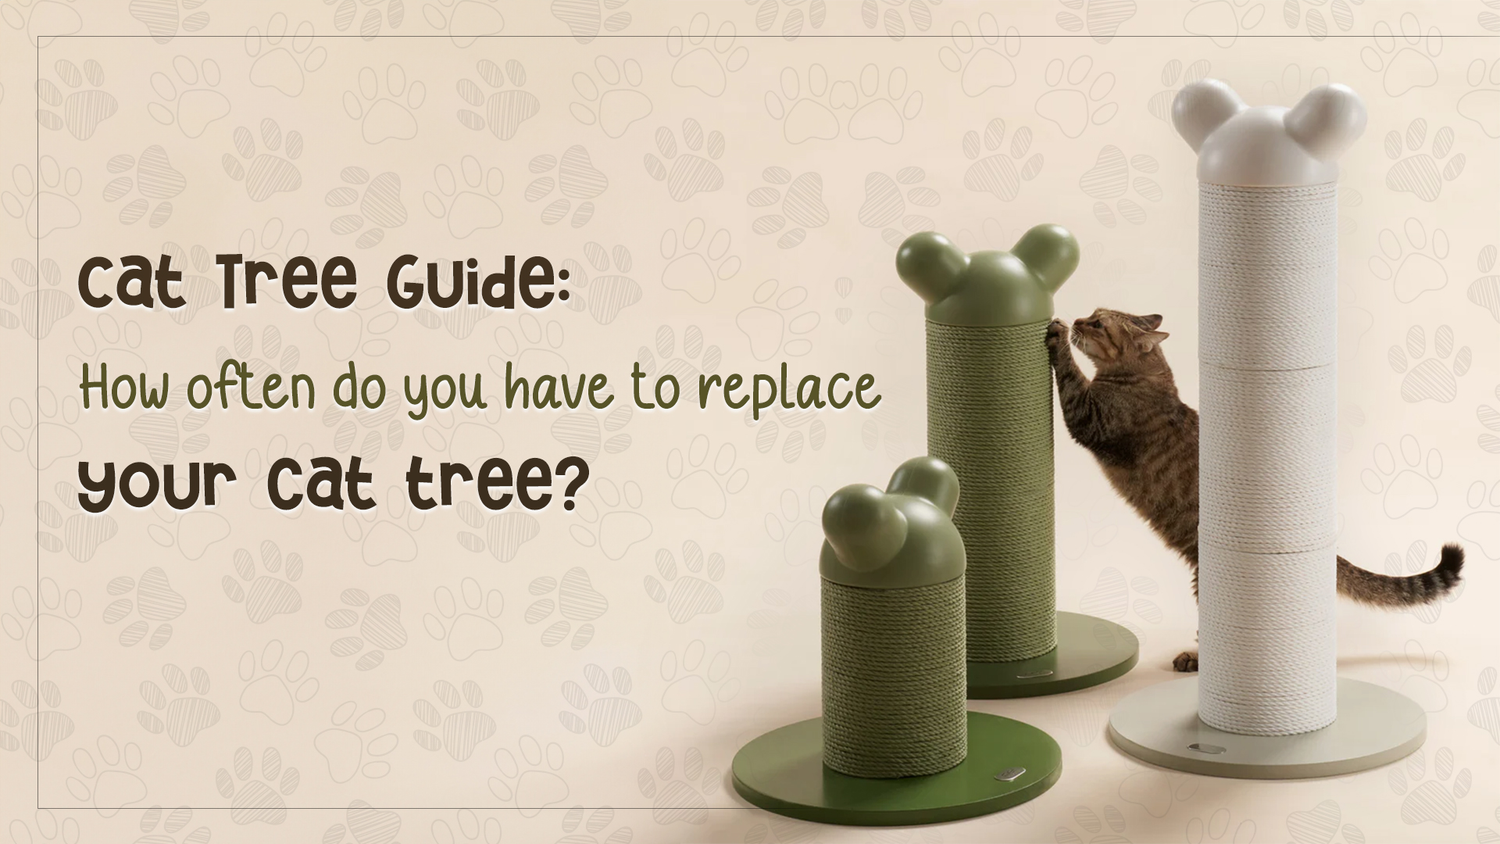 Cat Tree Guide: How often do you have to replace your cat tree?